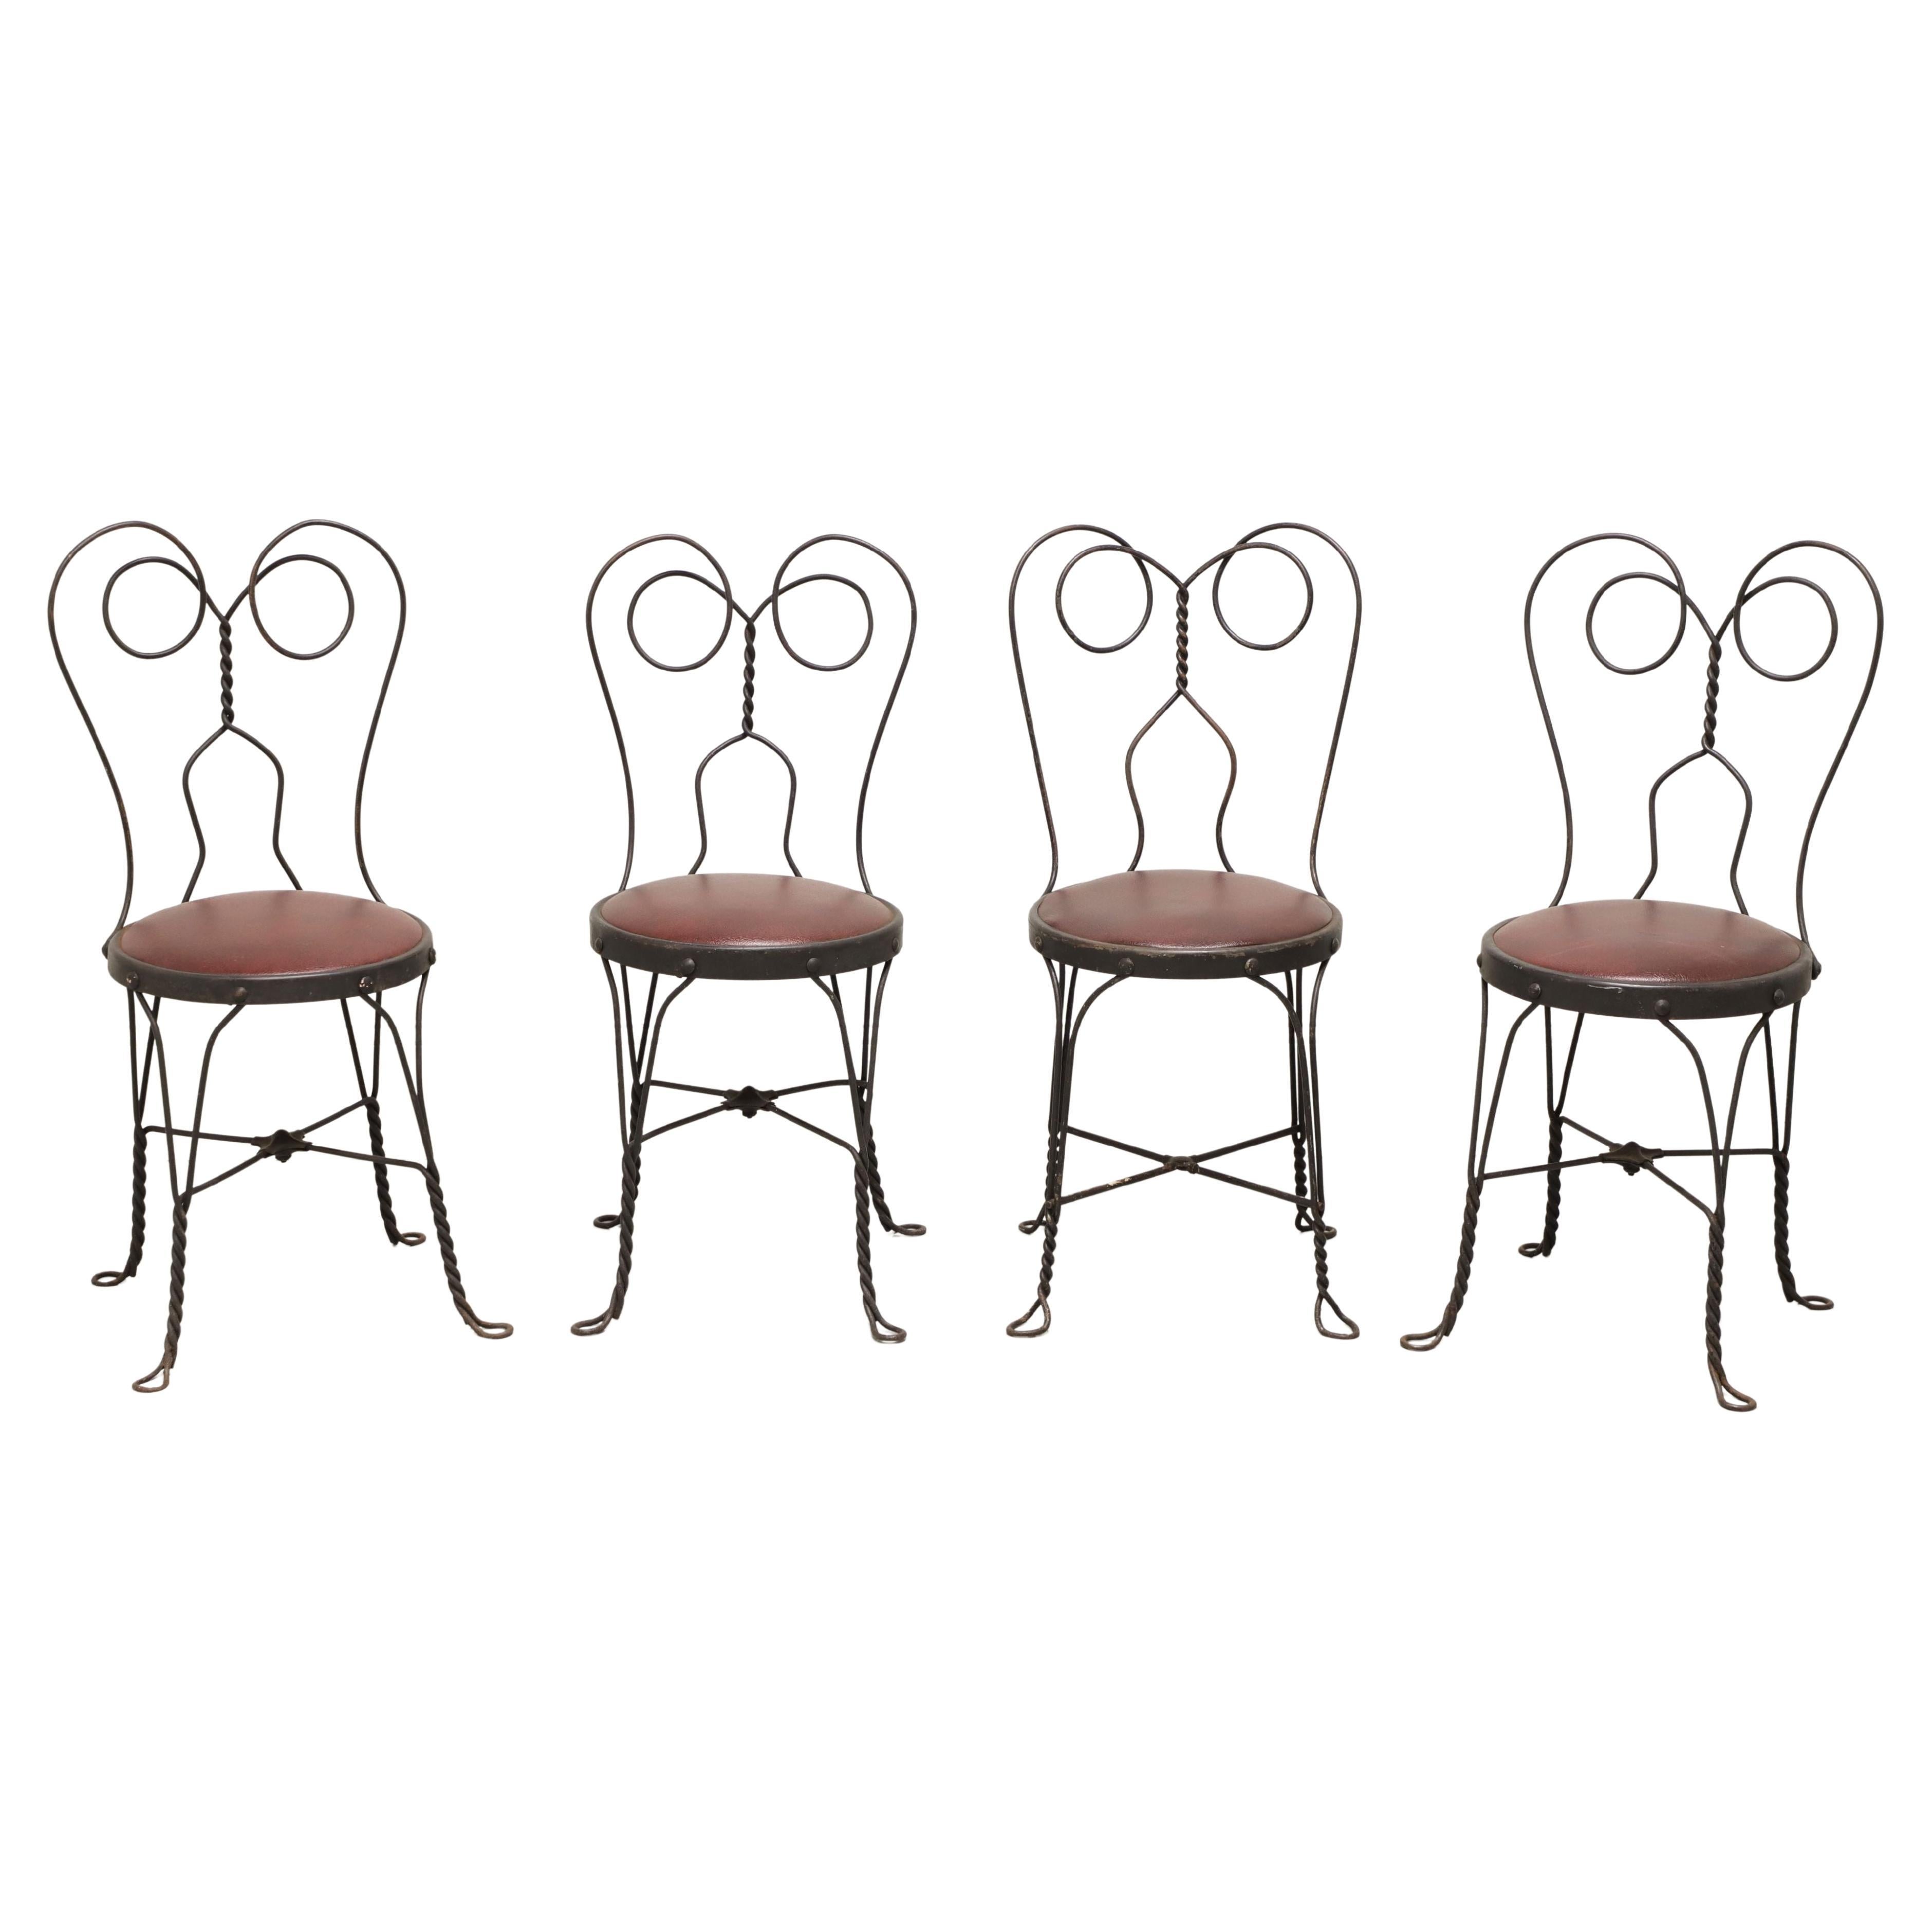 Wrought Iron Mid 20th Century Ice Cream Parlor / Bistro Chairs - Set of 4